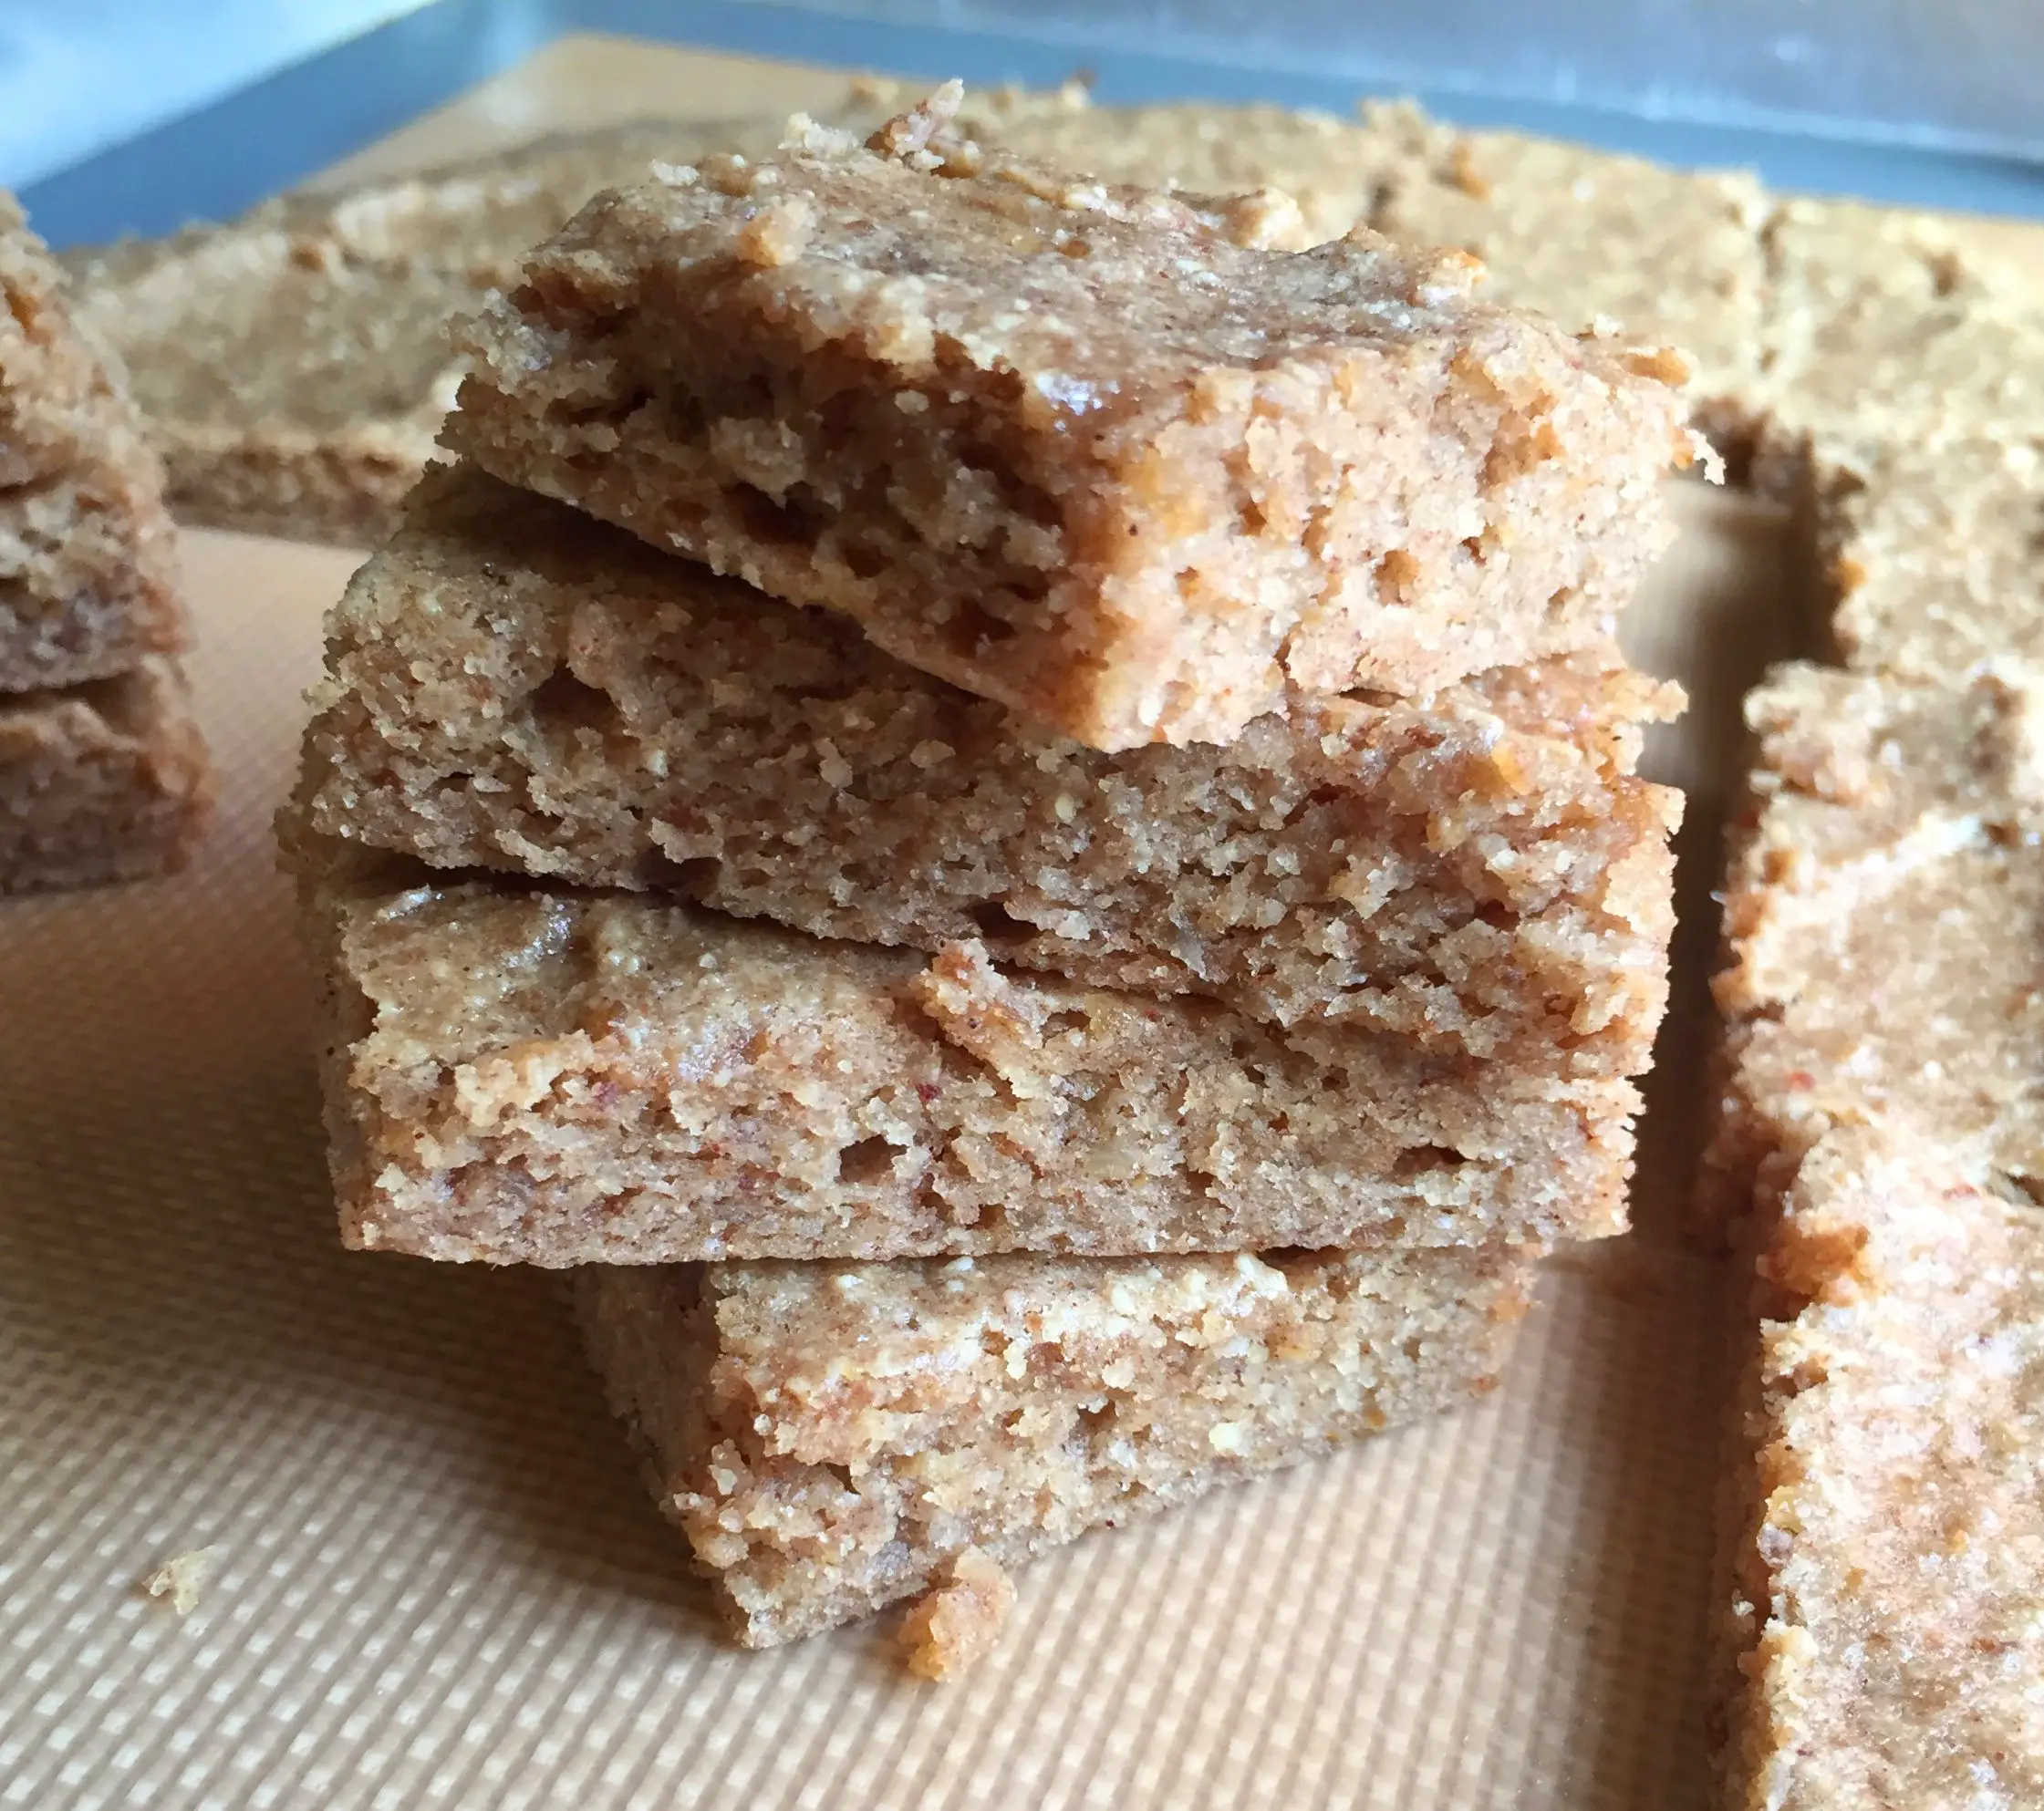 These bars use NO protein powder and taste like an rx bar. They are ...